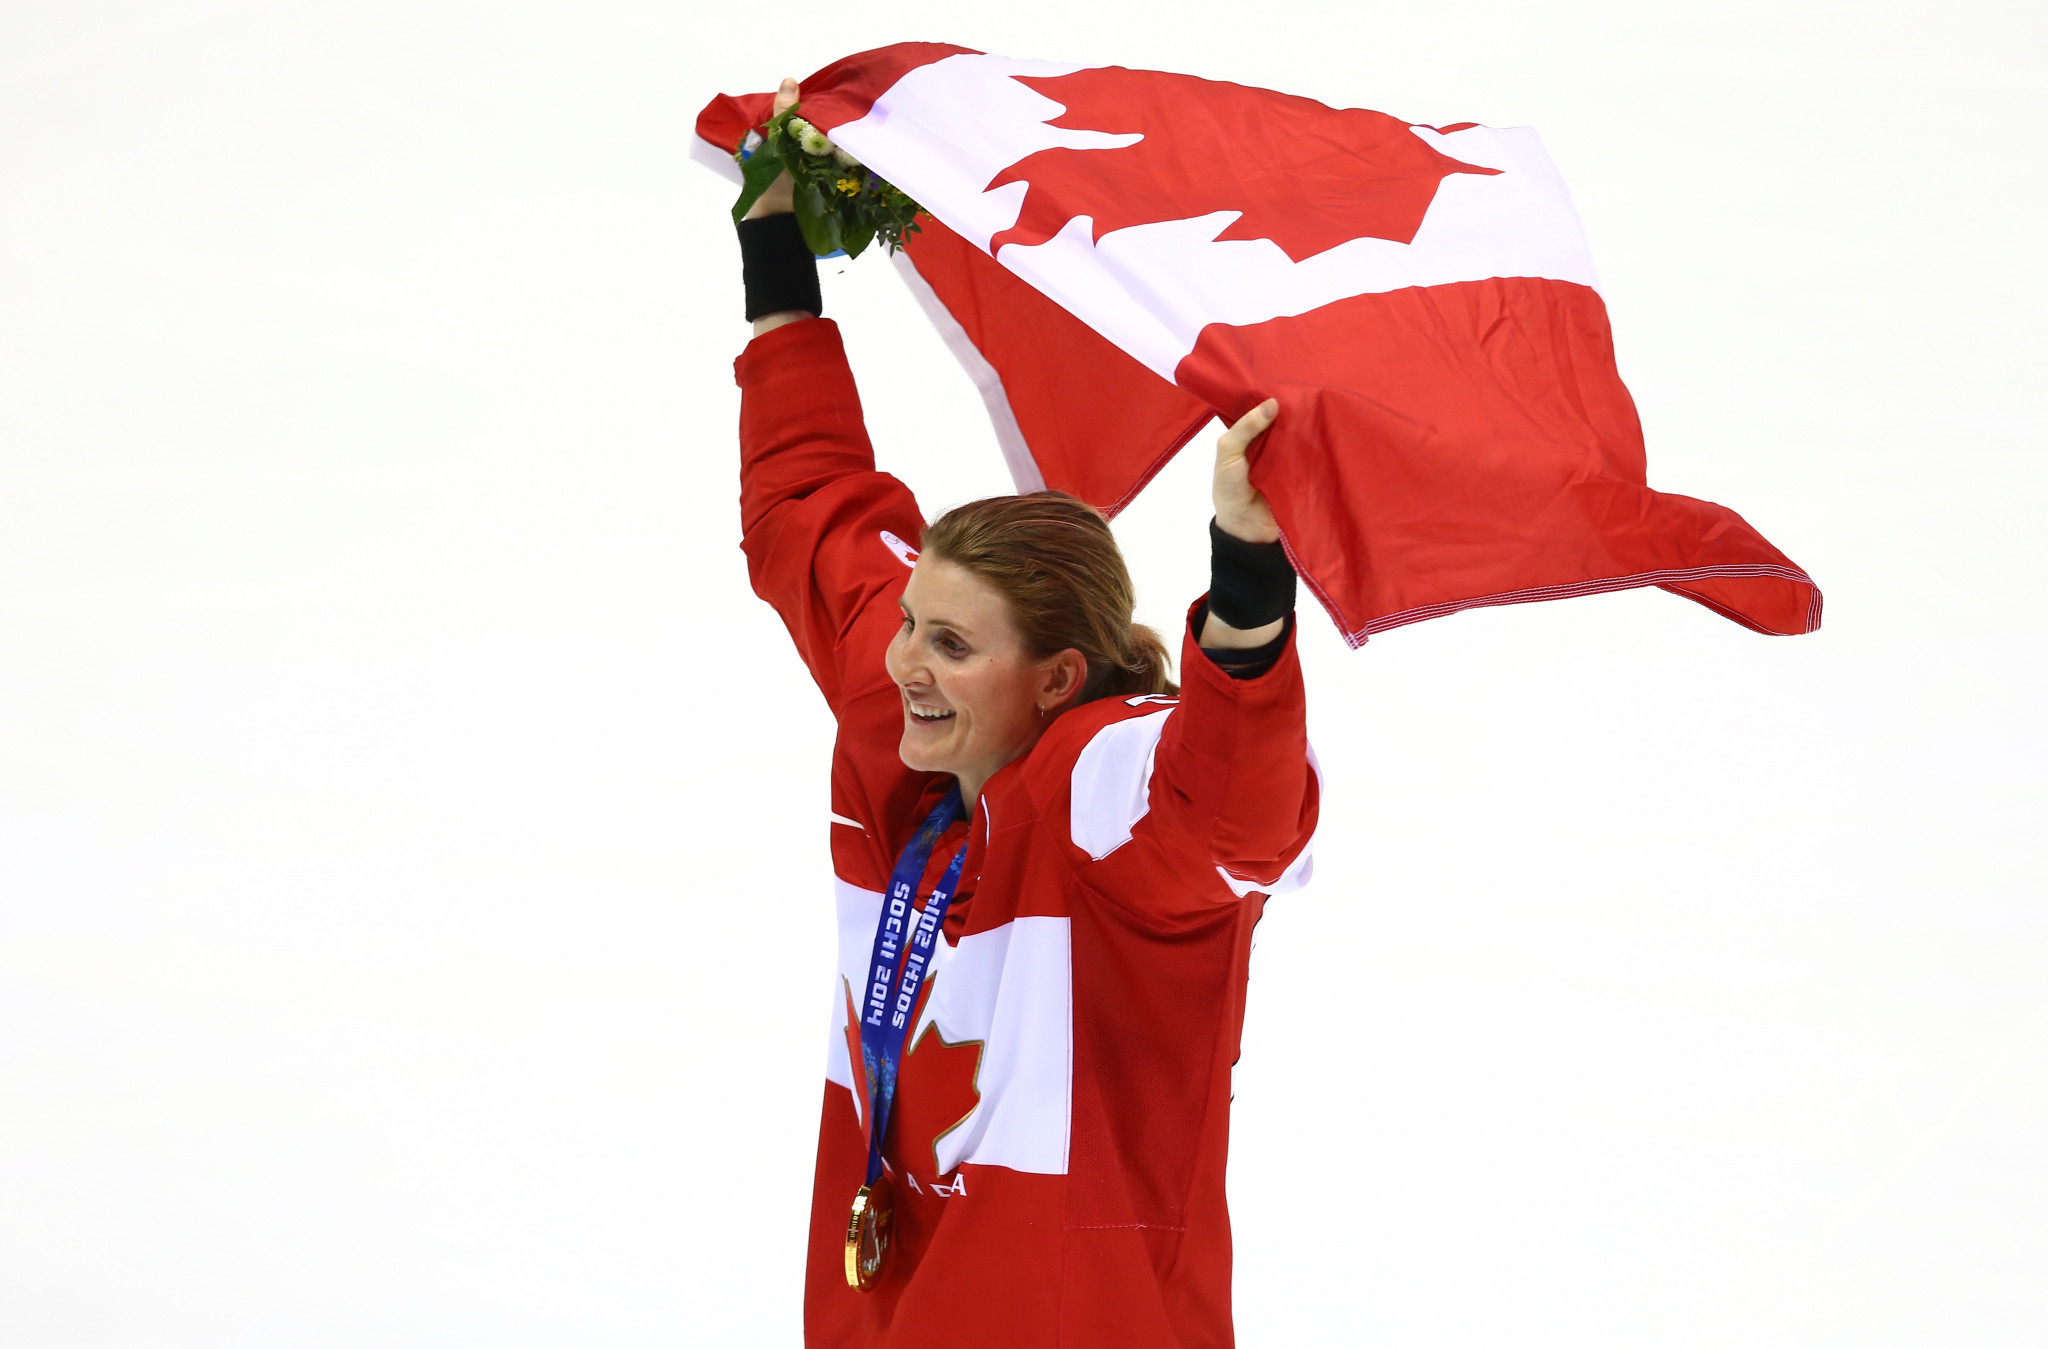 Hayley Wickenheiser is a four-time Olympic gold medallist and is considered among the greatest women's players of all time ©Getty Images